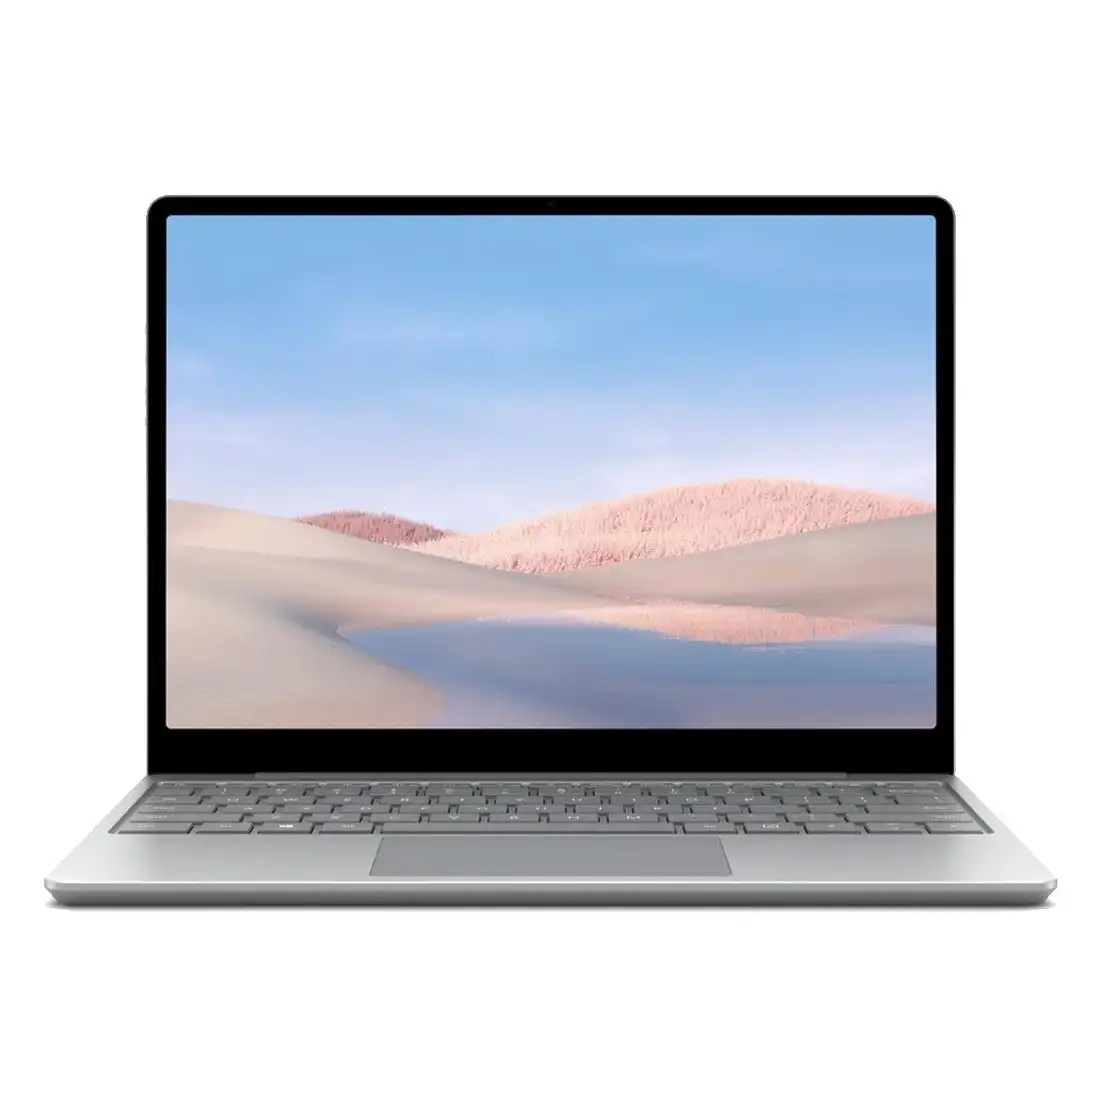 Microsoft Surface Laptop Go (12.4", I5, 64GB/4GB, W10P, 1ZP-00023) [Refurbished] - Excellent